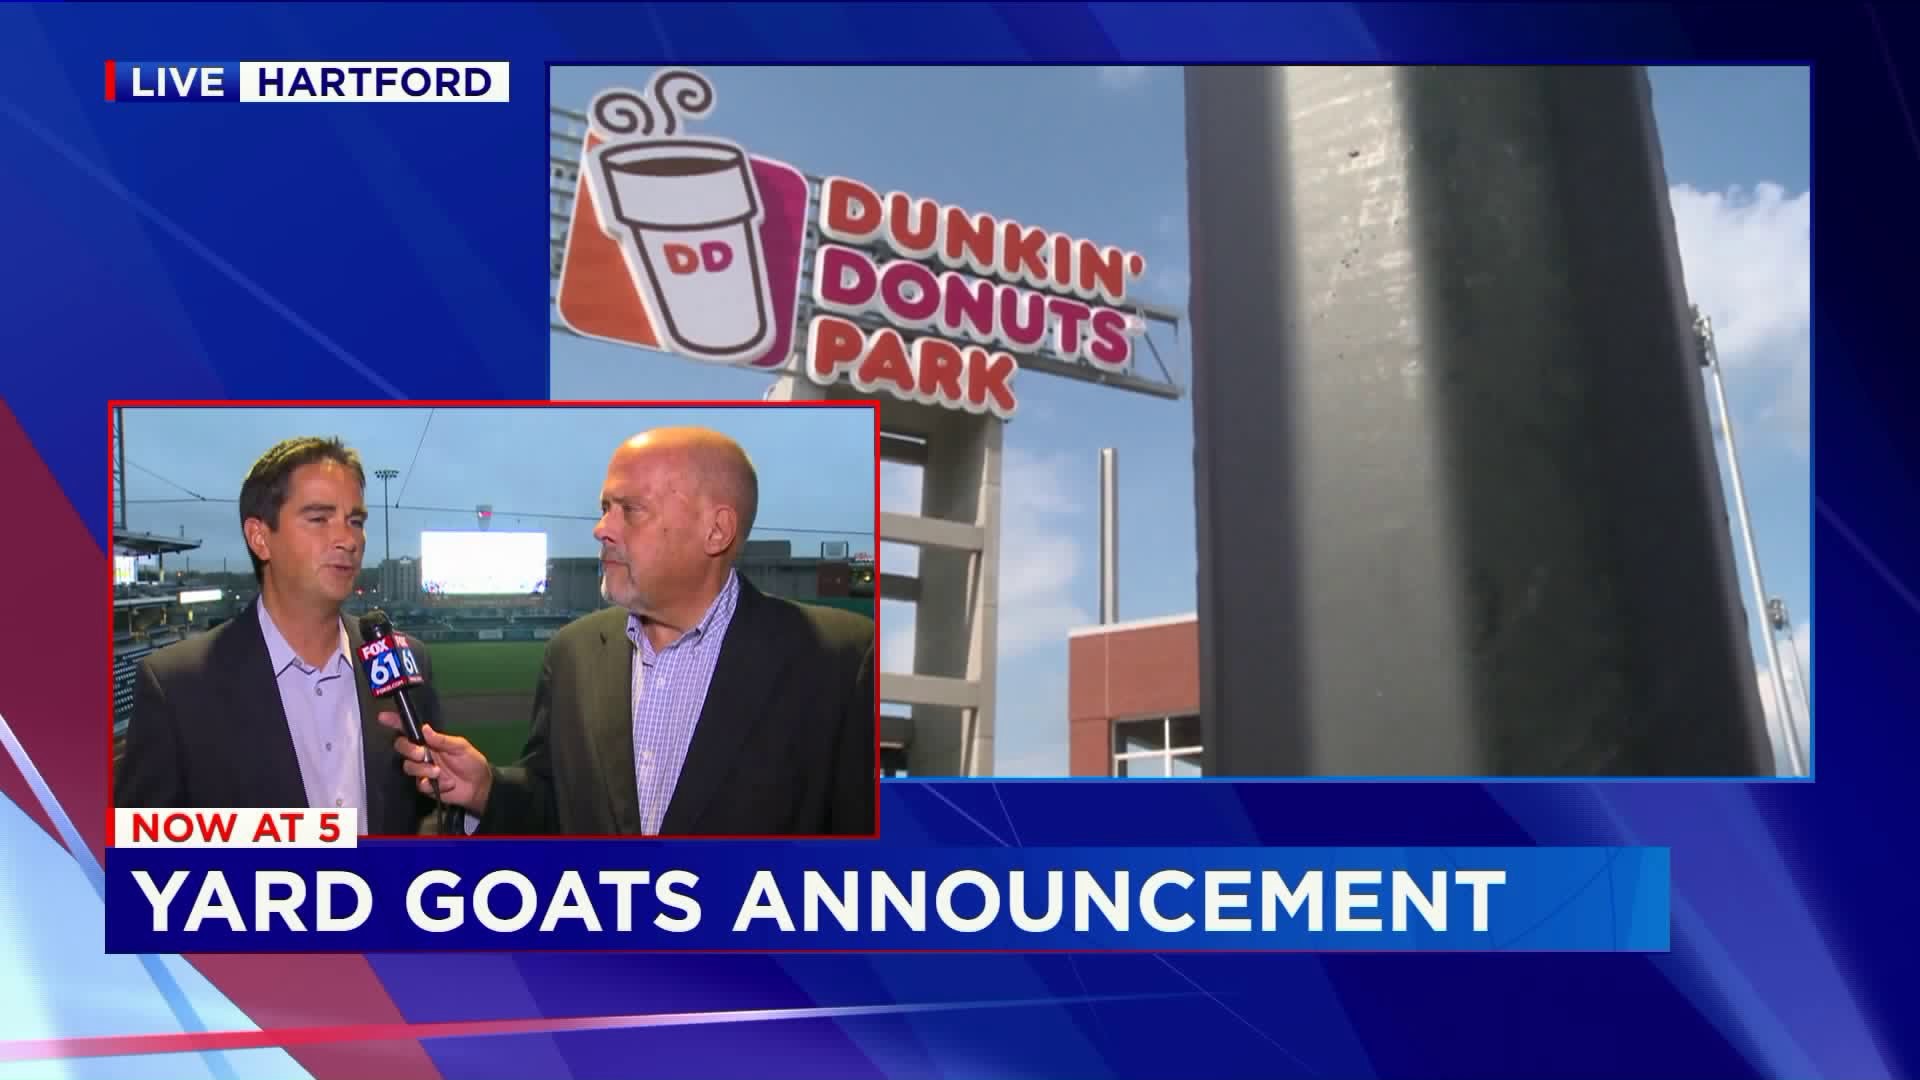 Hartford Yard Goats to host 2021 Eastern League All-Star game